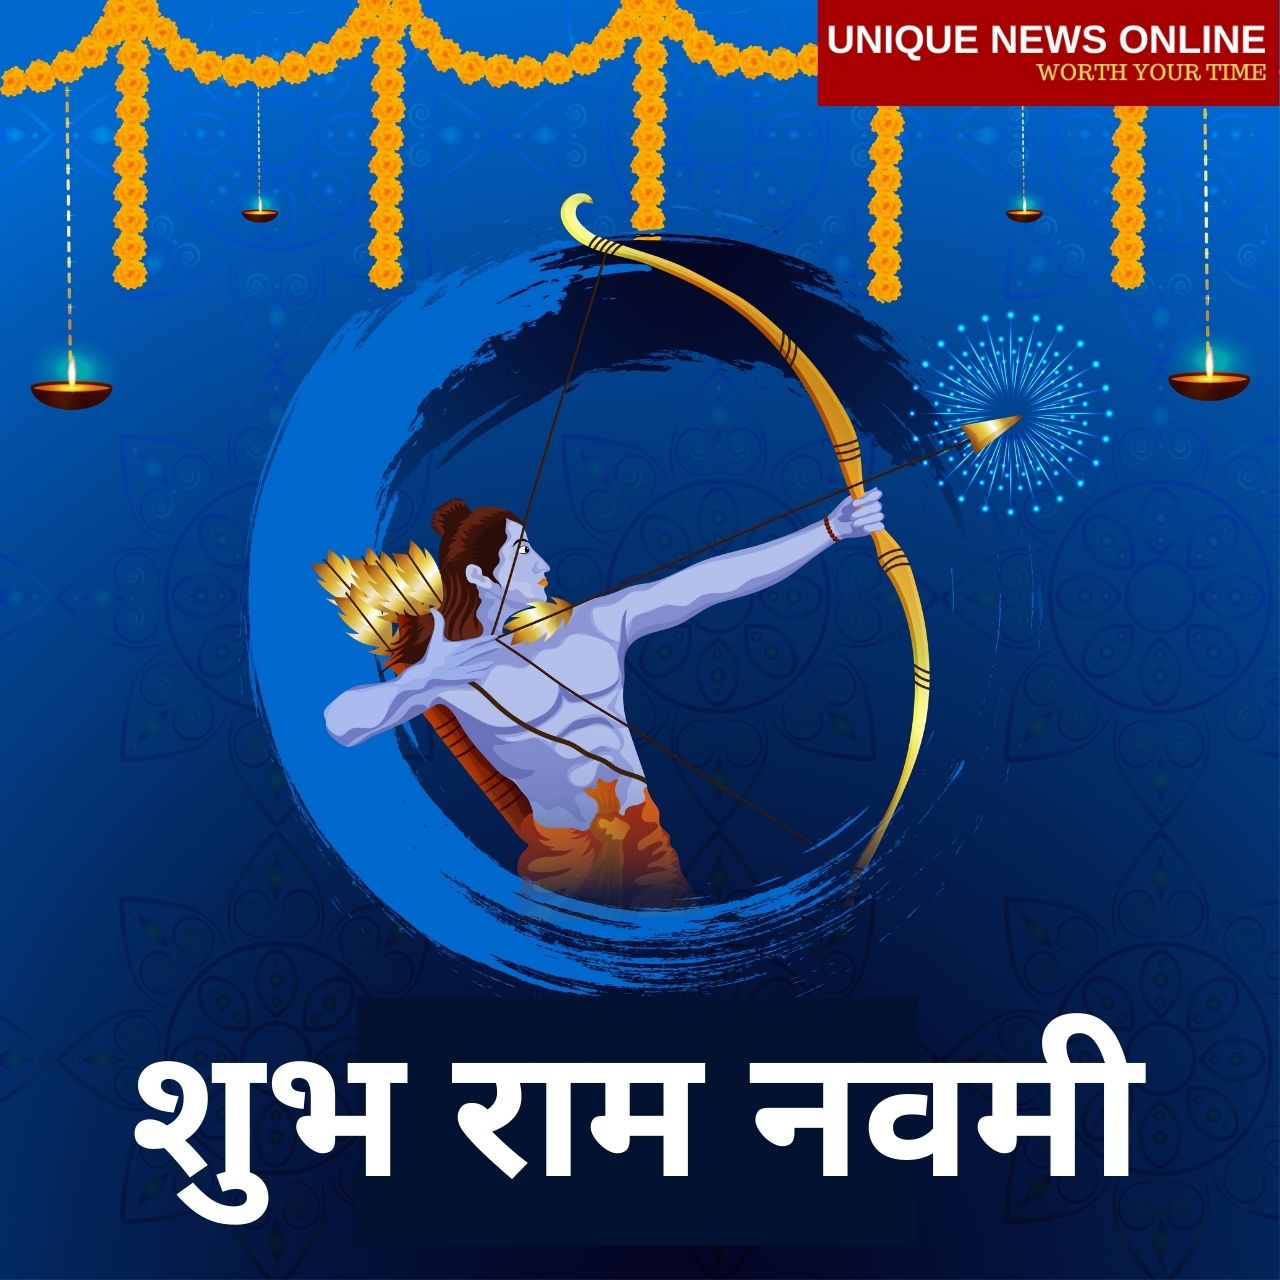 Happy Ram Navami 2021 Wishes in Sanskrit, Messages, Quotes, Images, and Greetings to Share